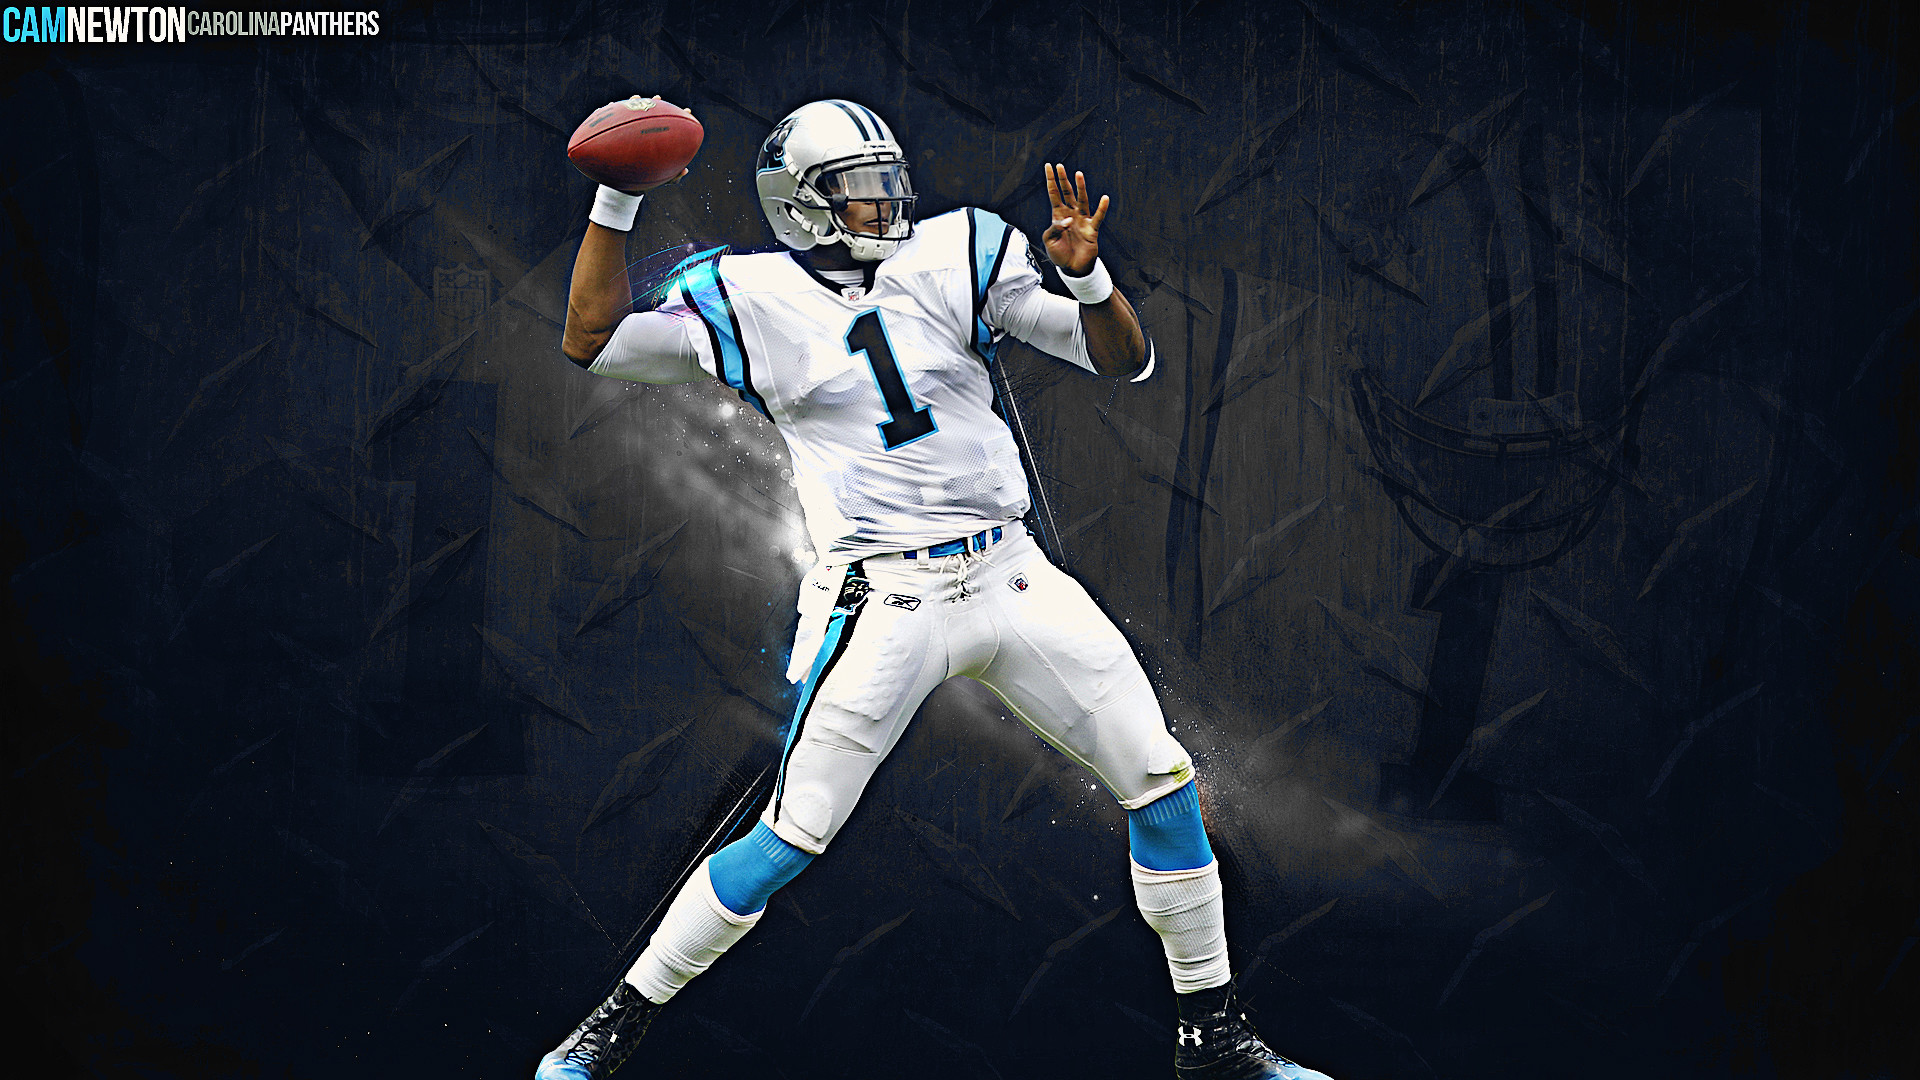 cam wallpaper,player,football player,american football,gridiron football,competition event